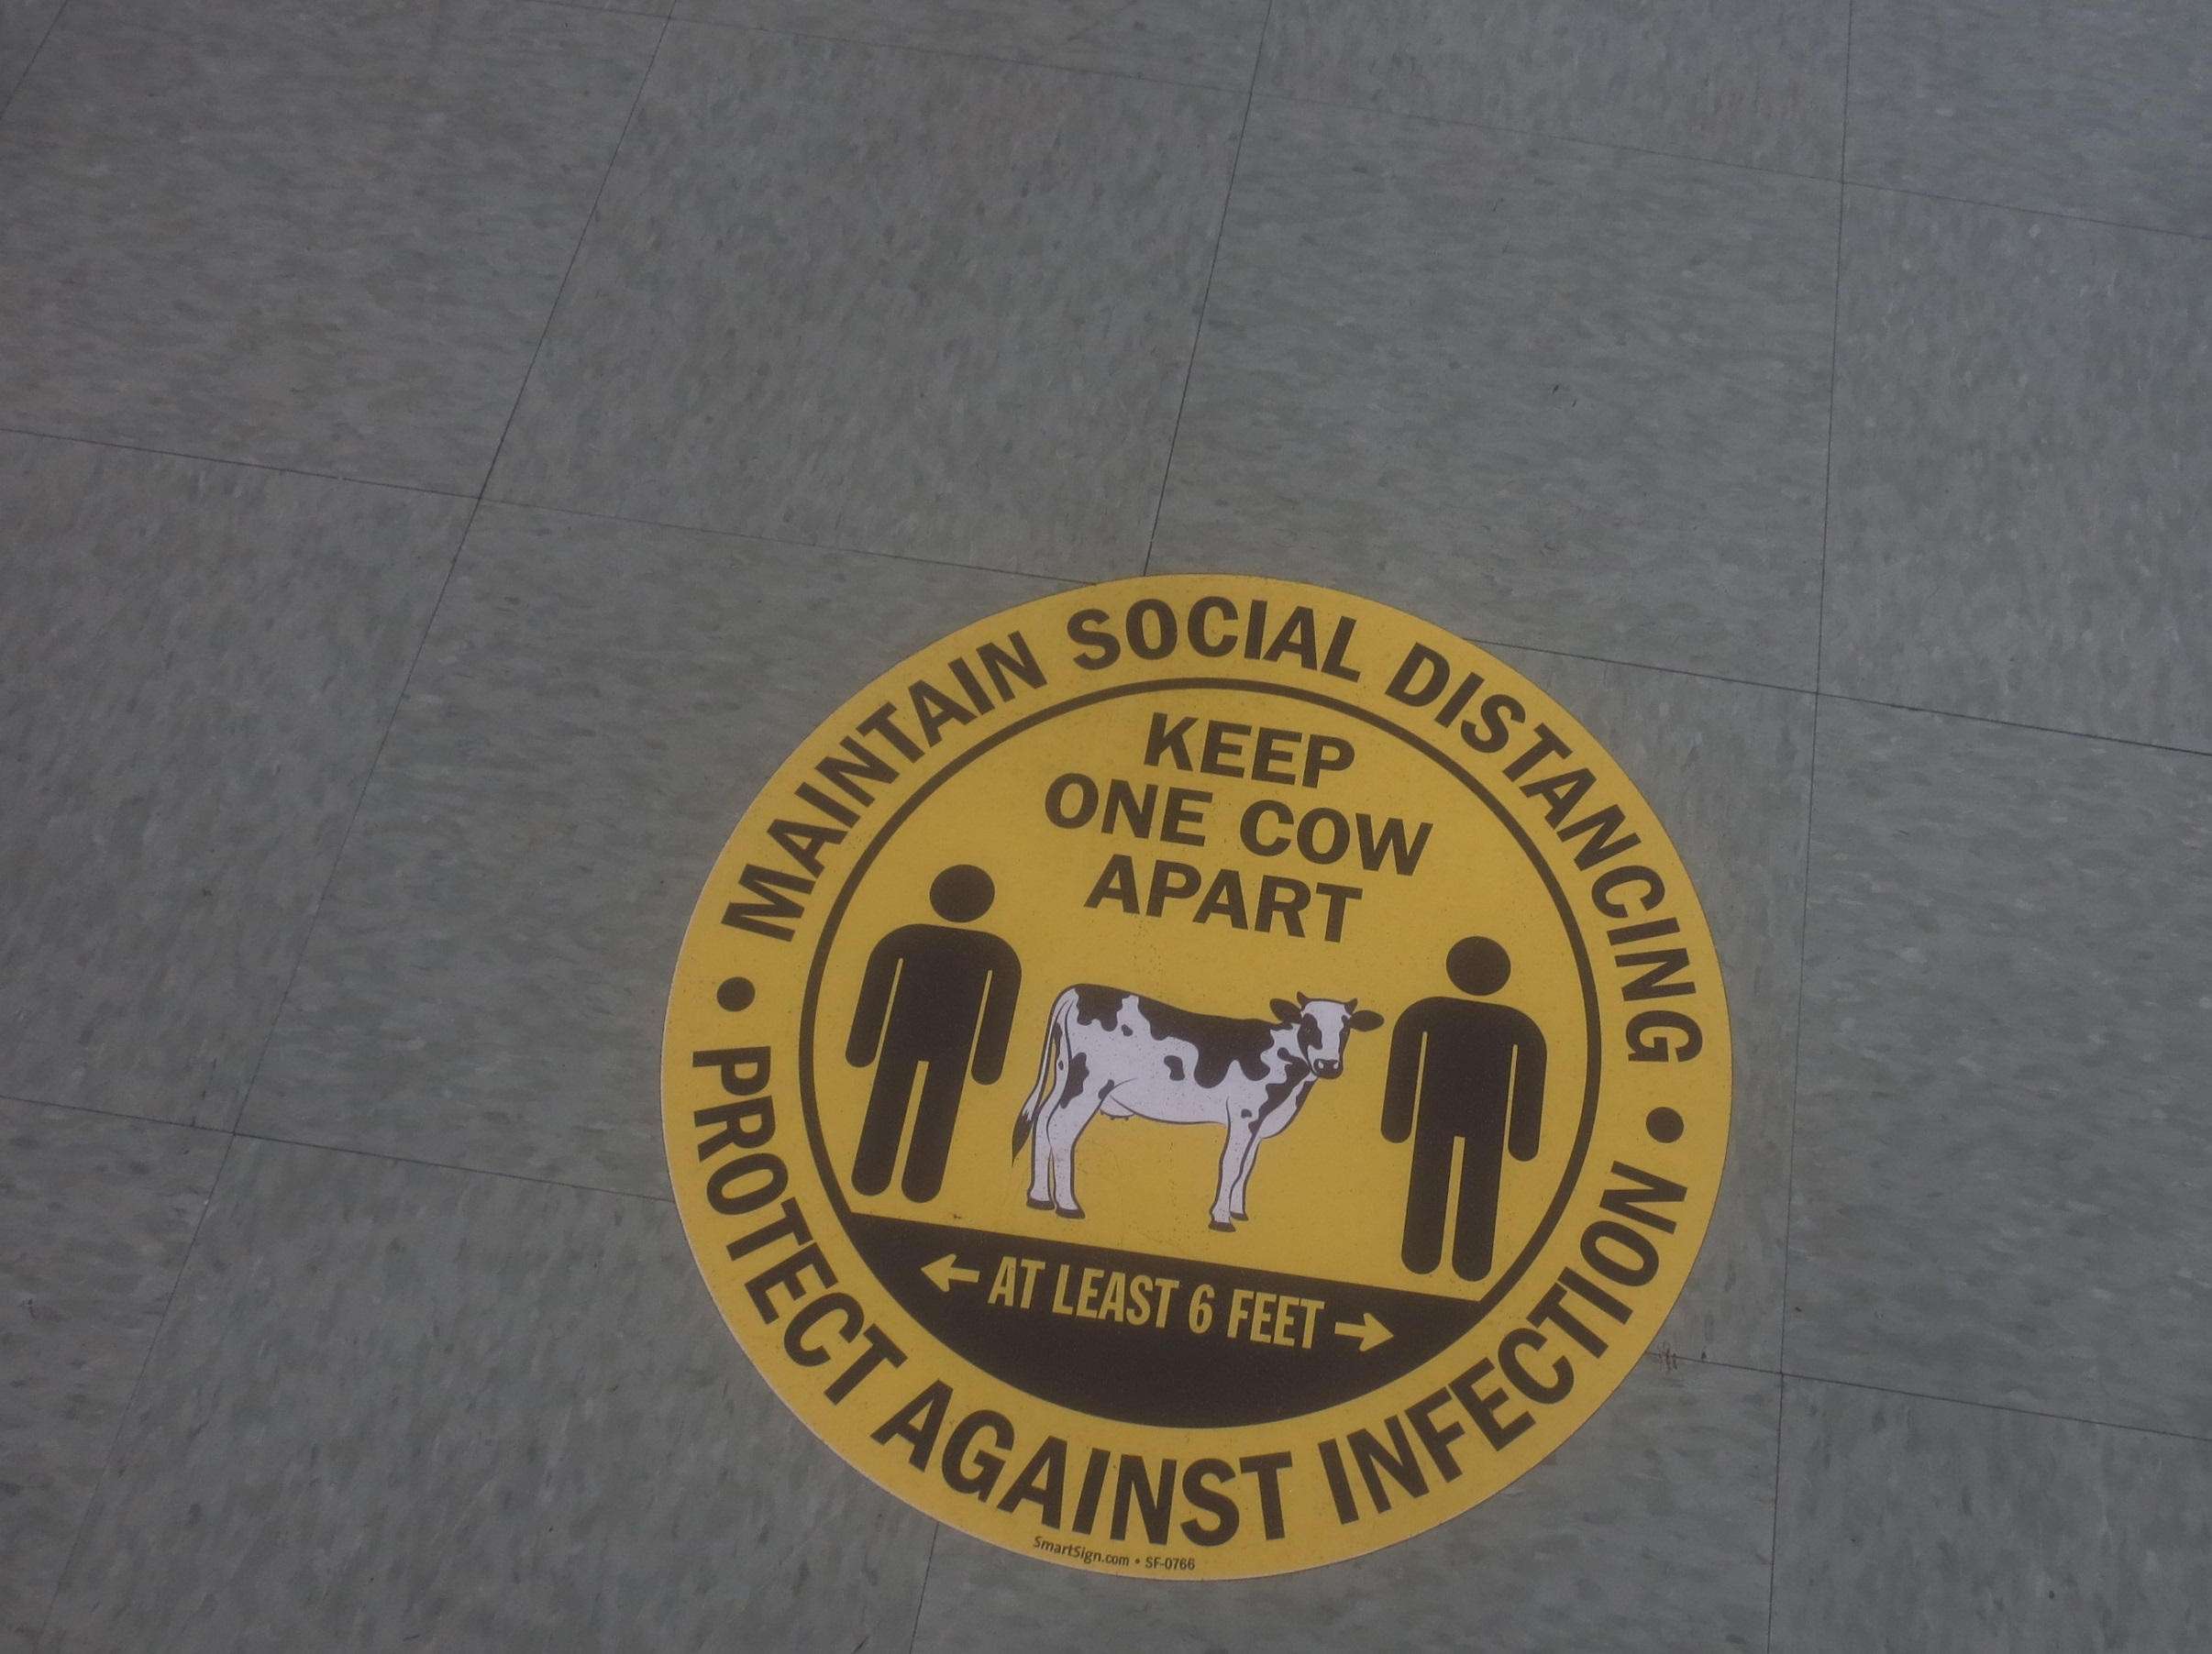 social distancing circle on a linoleum floor that says to keep one cow apart